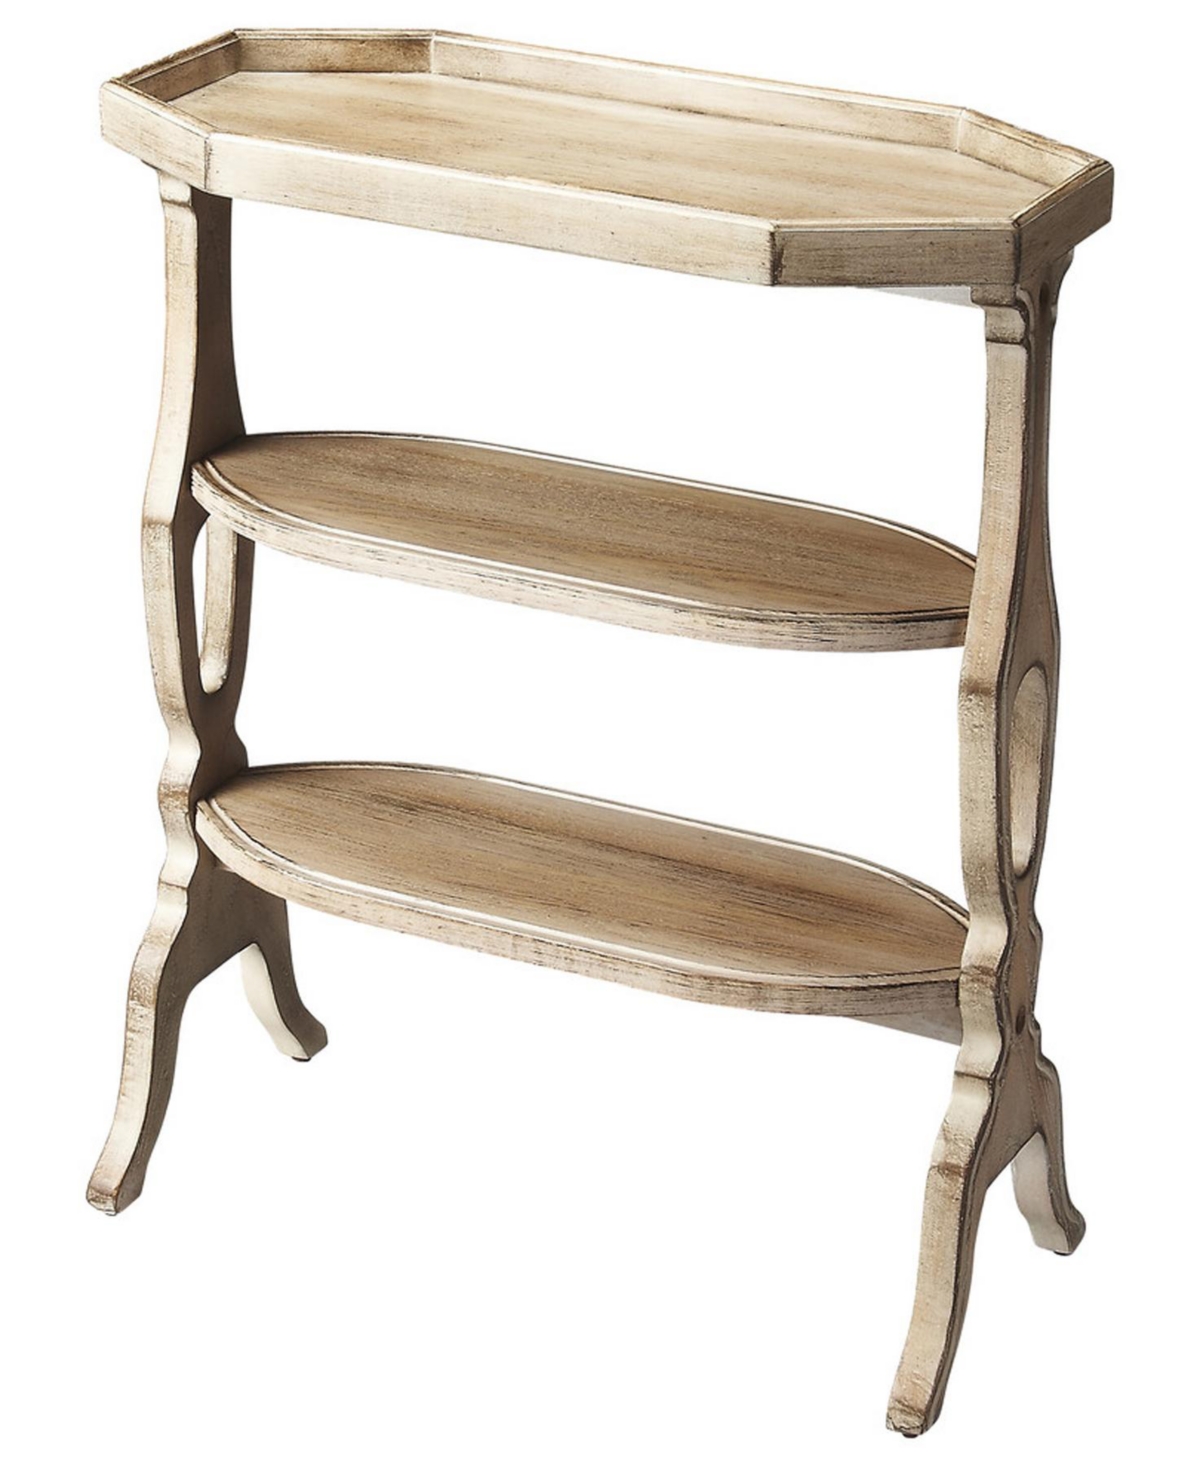 Hadley Driftwood Accent Table